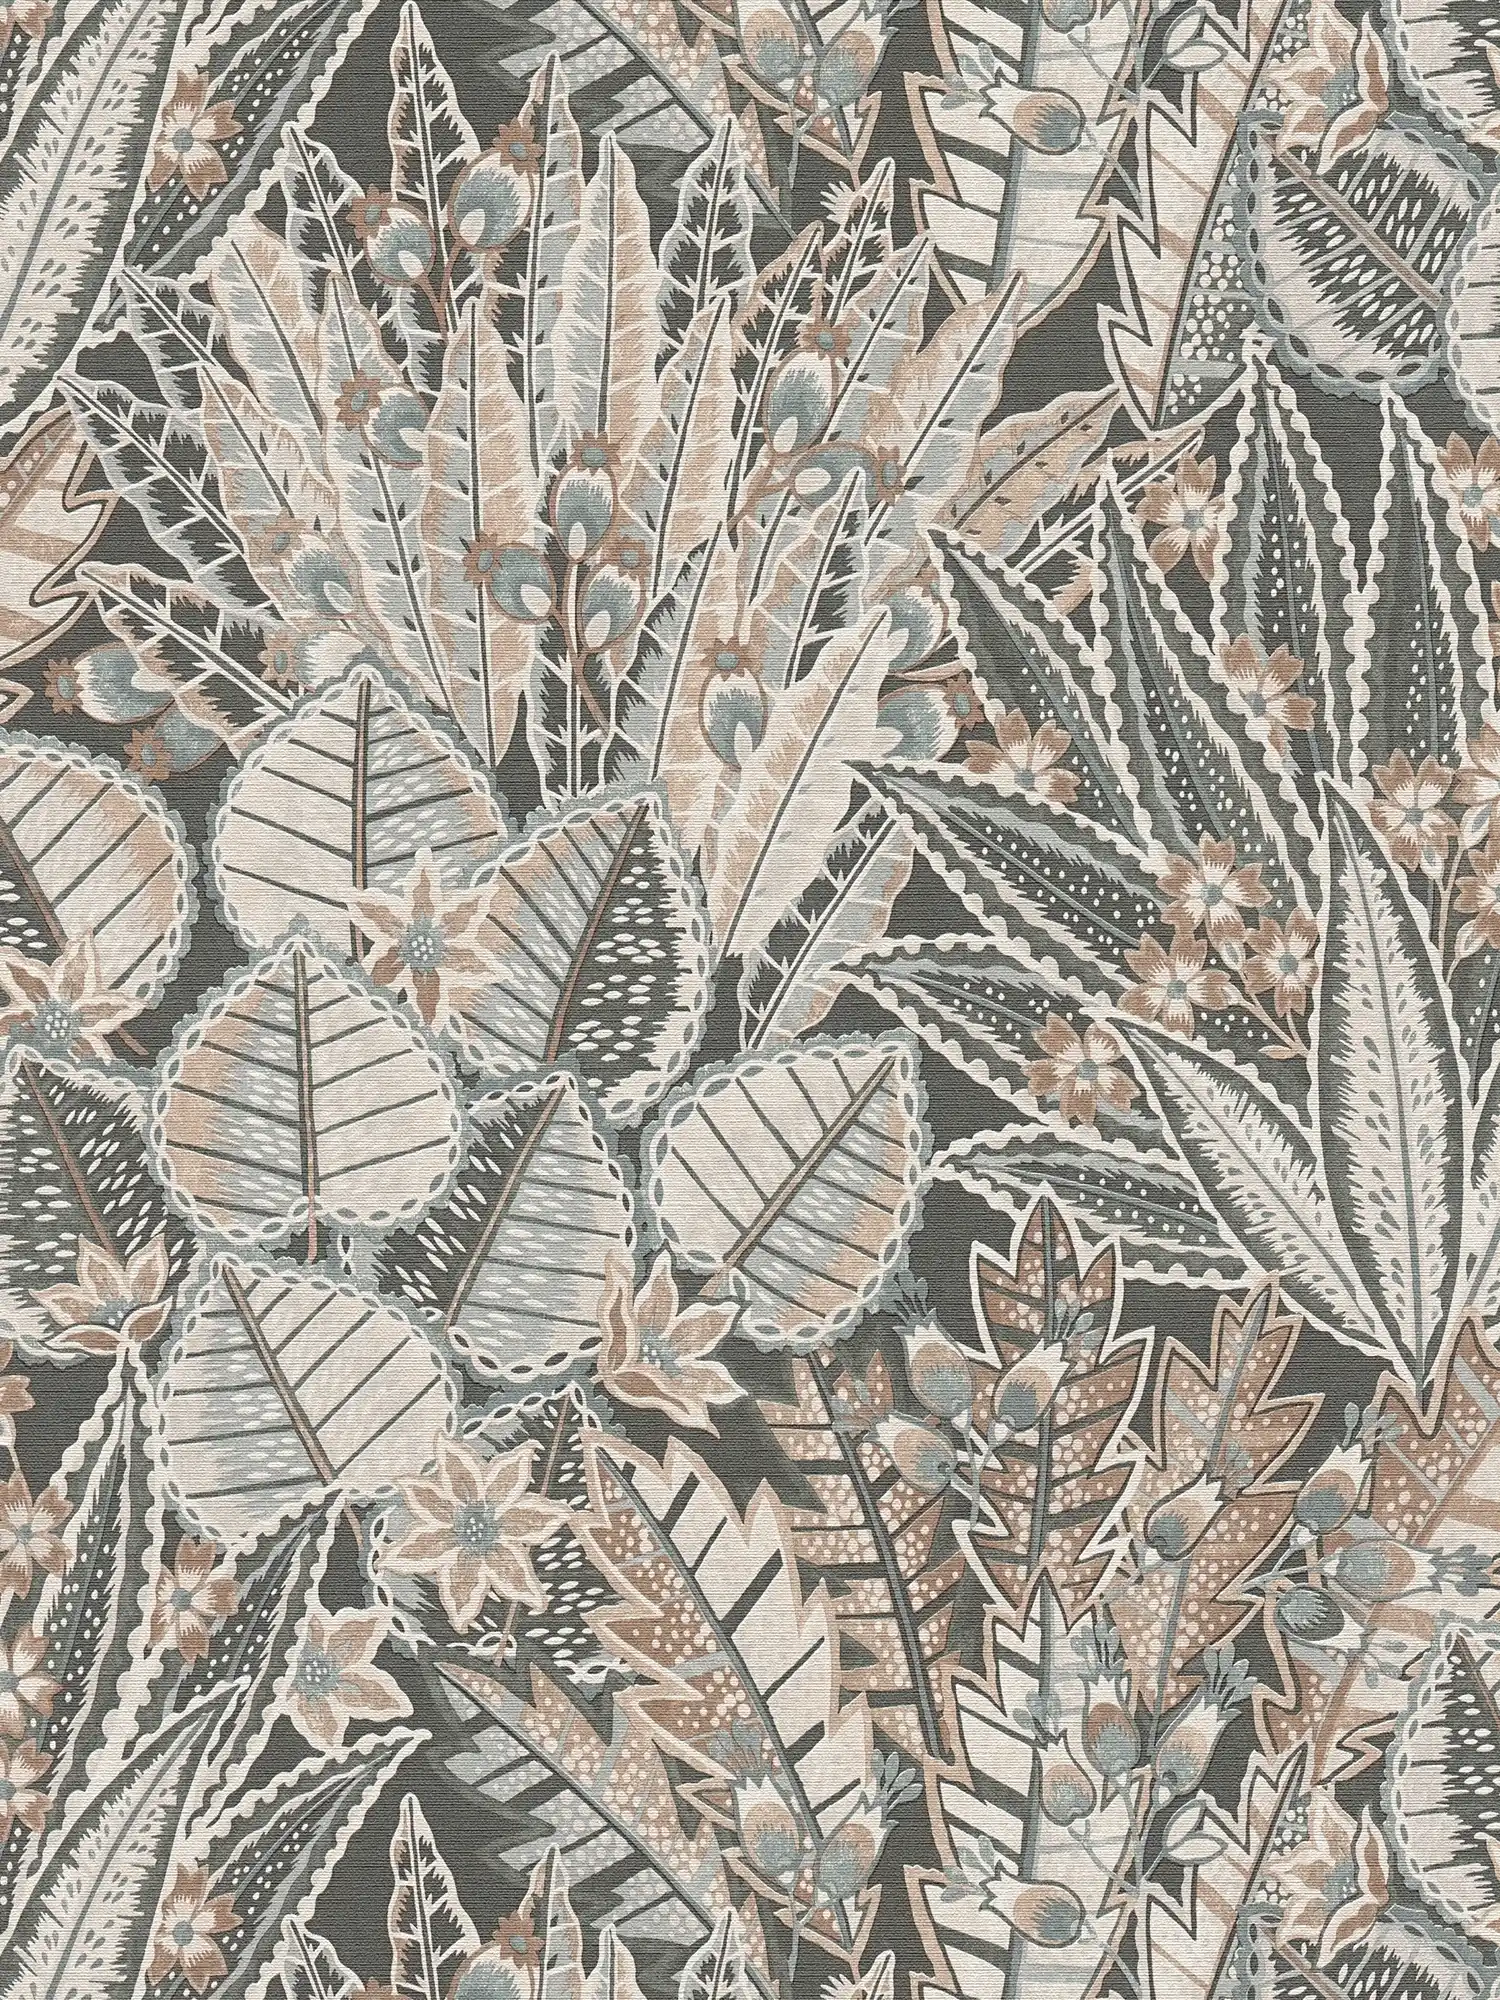 Leaf pattern in abstract look on non-woven wallpaper - black, brown, grey
